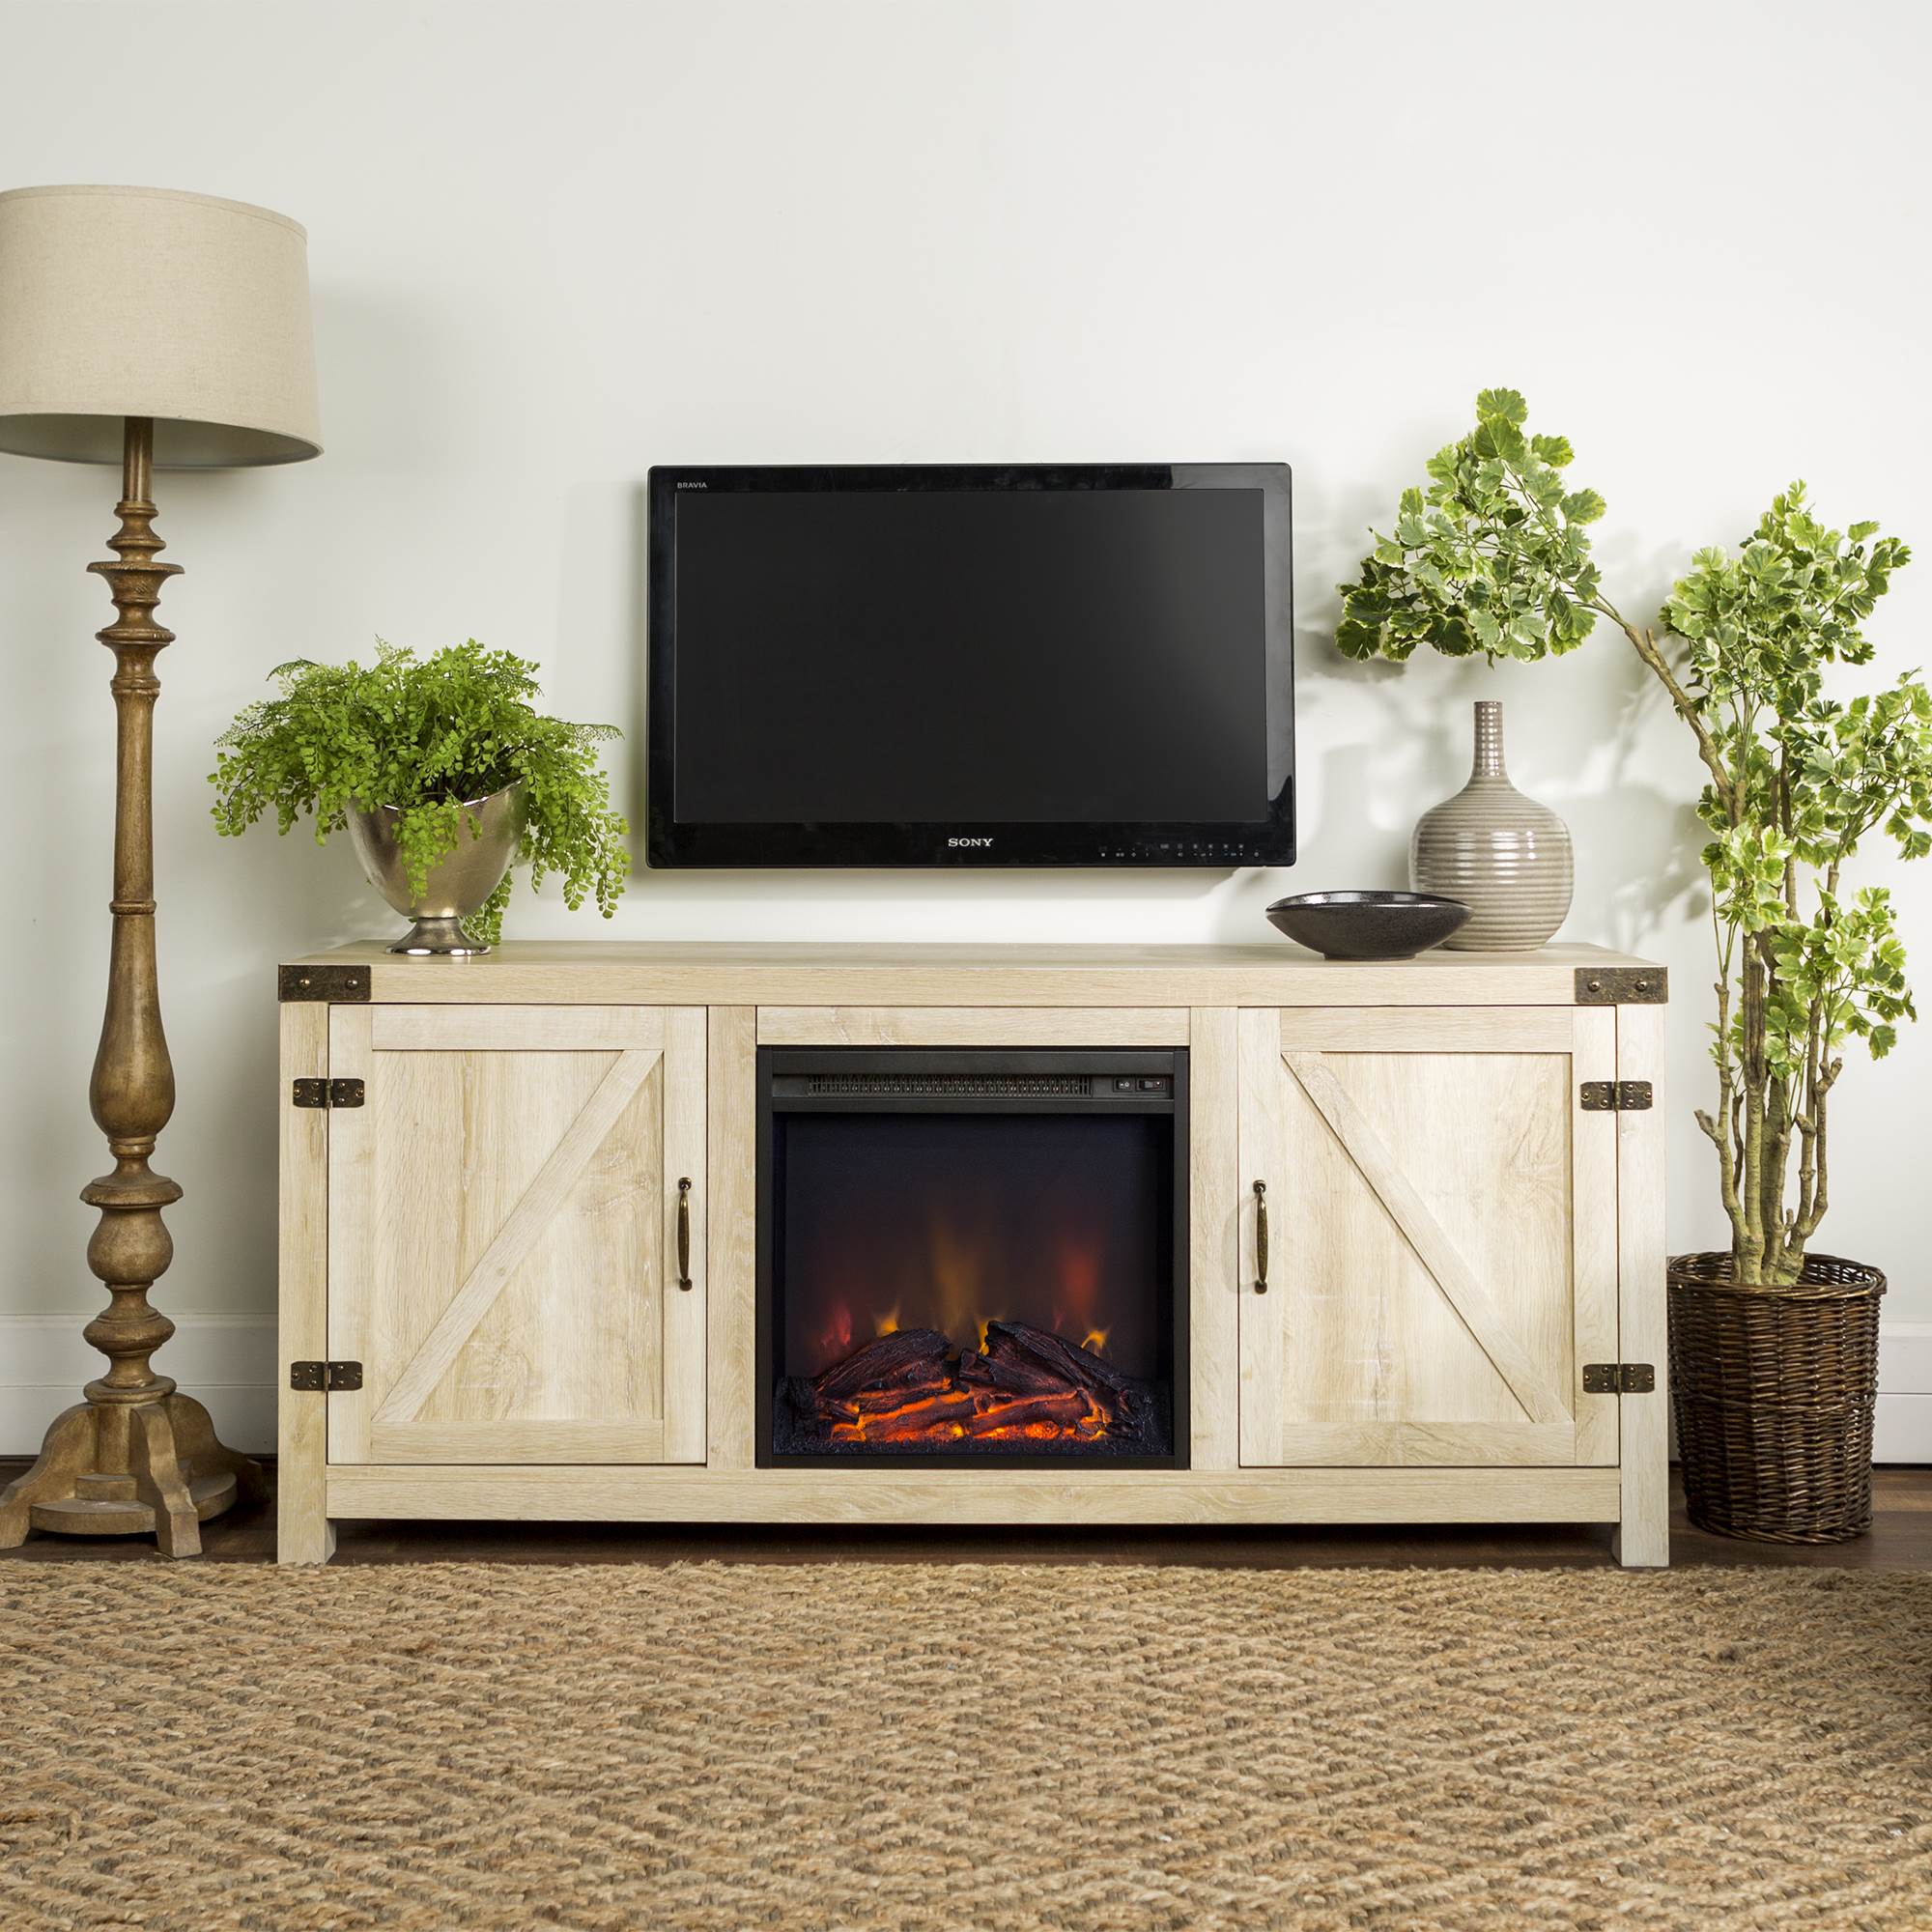 Barn Door Fireplace Tv Stand Beautiful White Fireplace Tv Stand